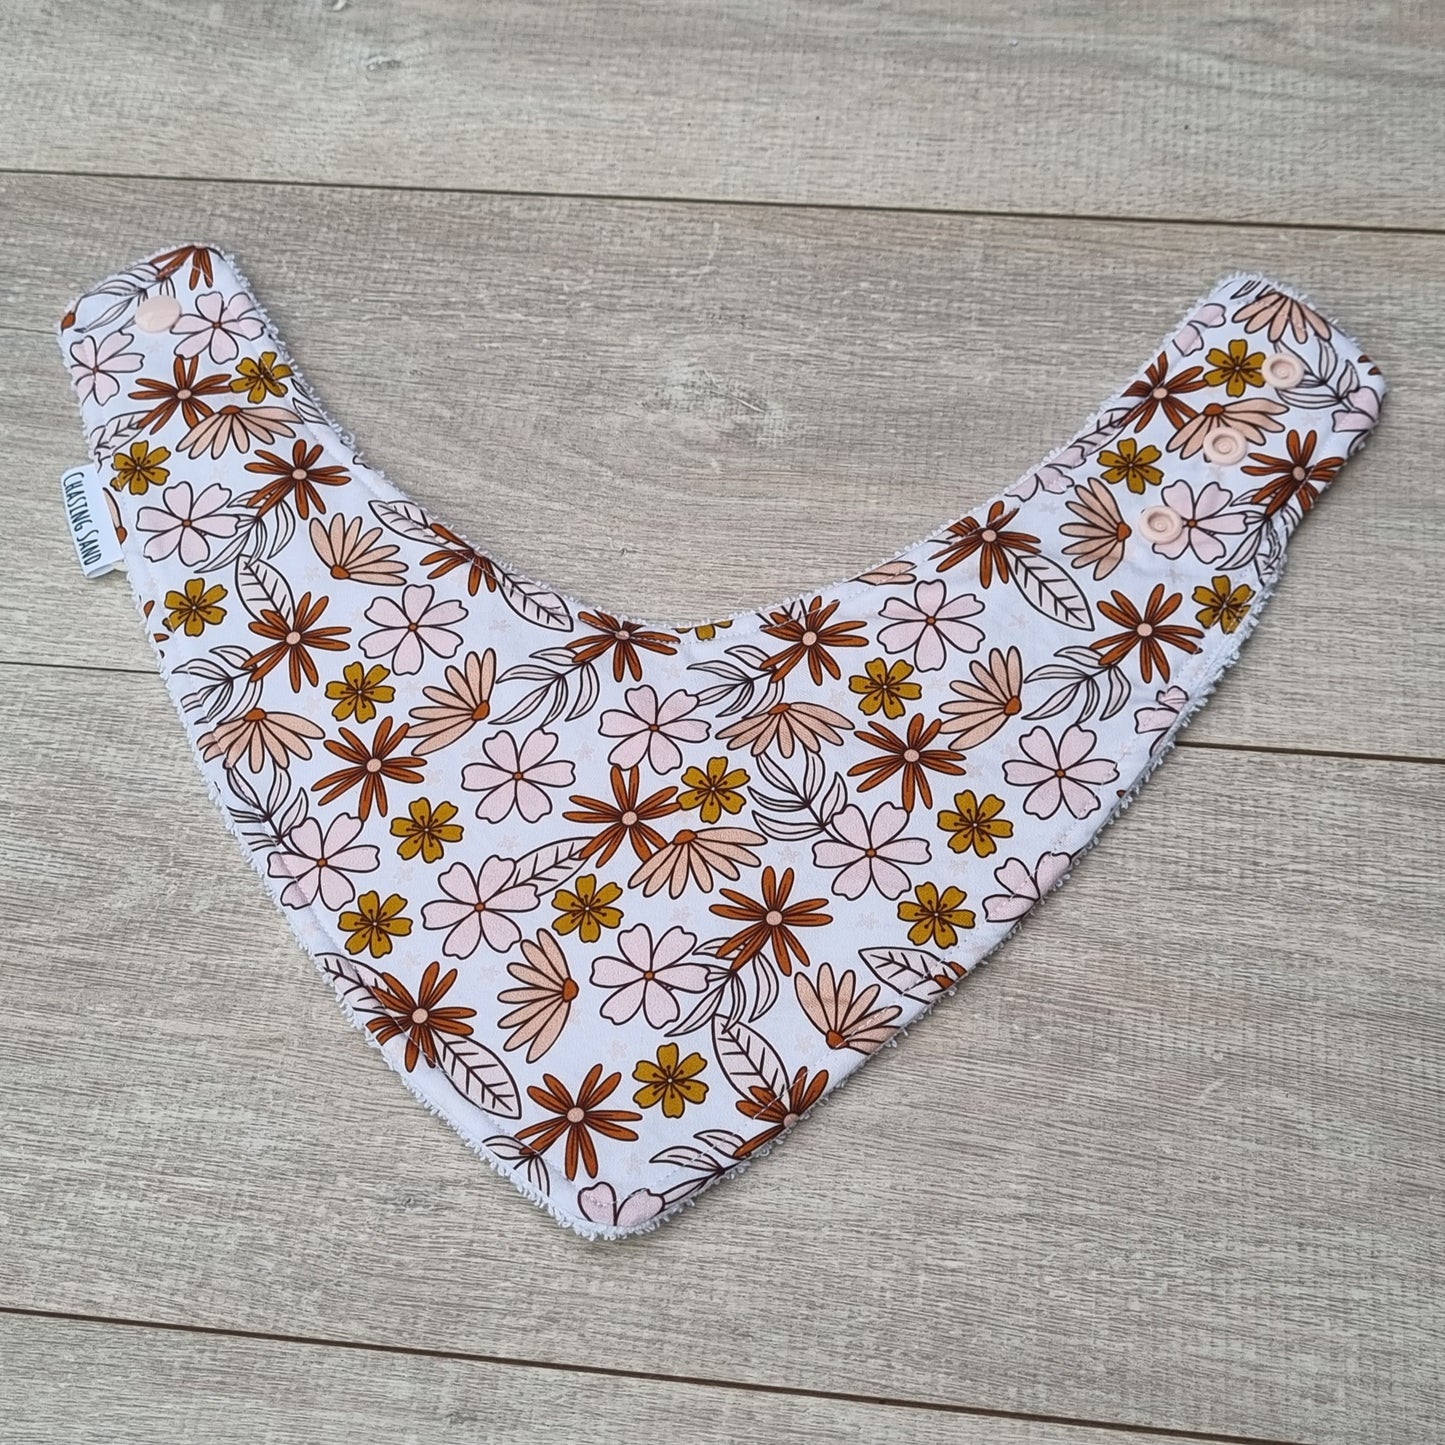 Dribble Bib - Willow against wooden backdrop. Brown and pink flowers on white background.